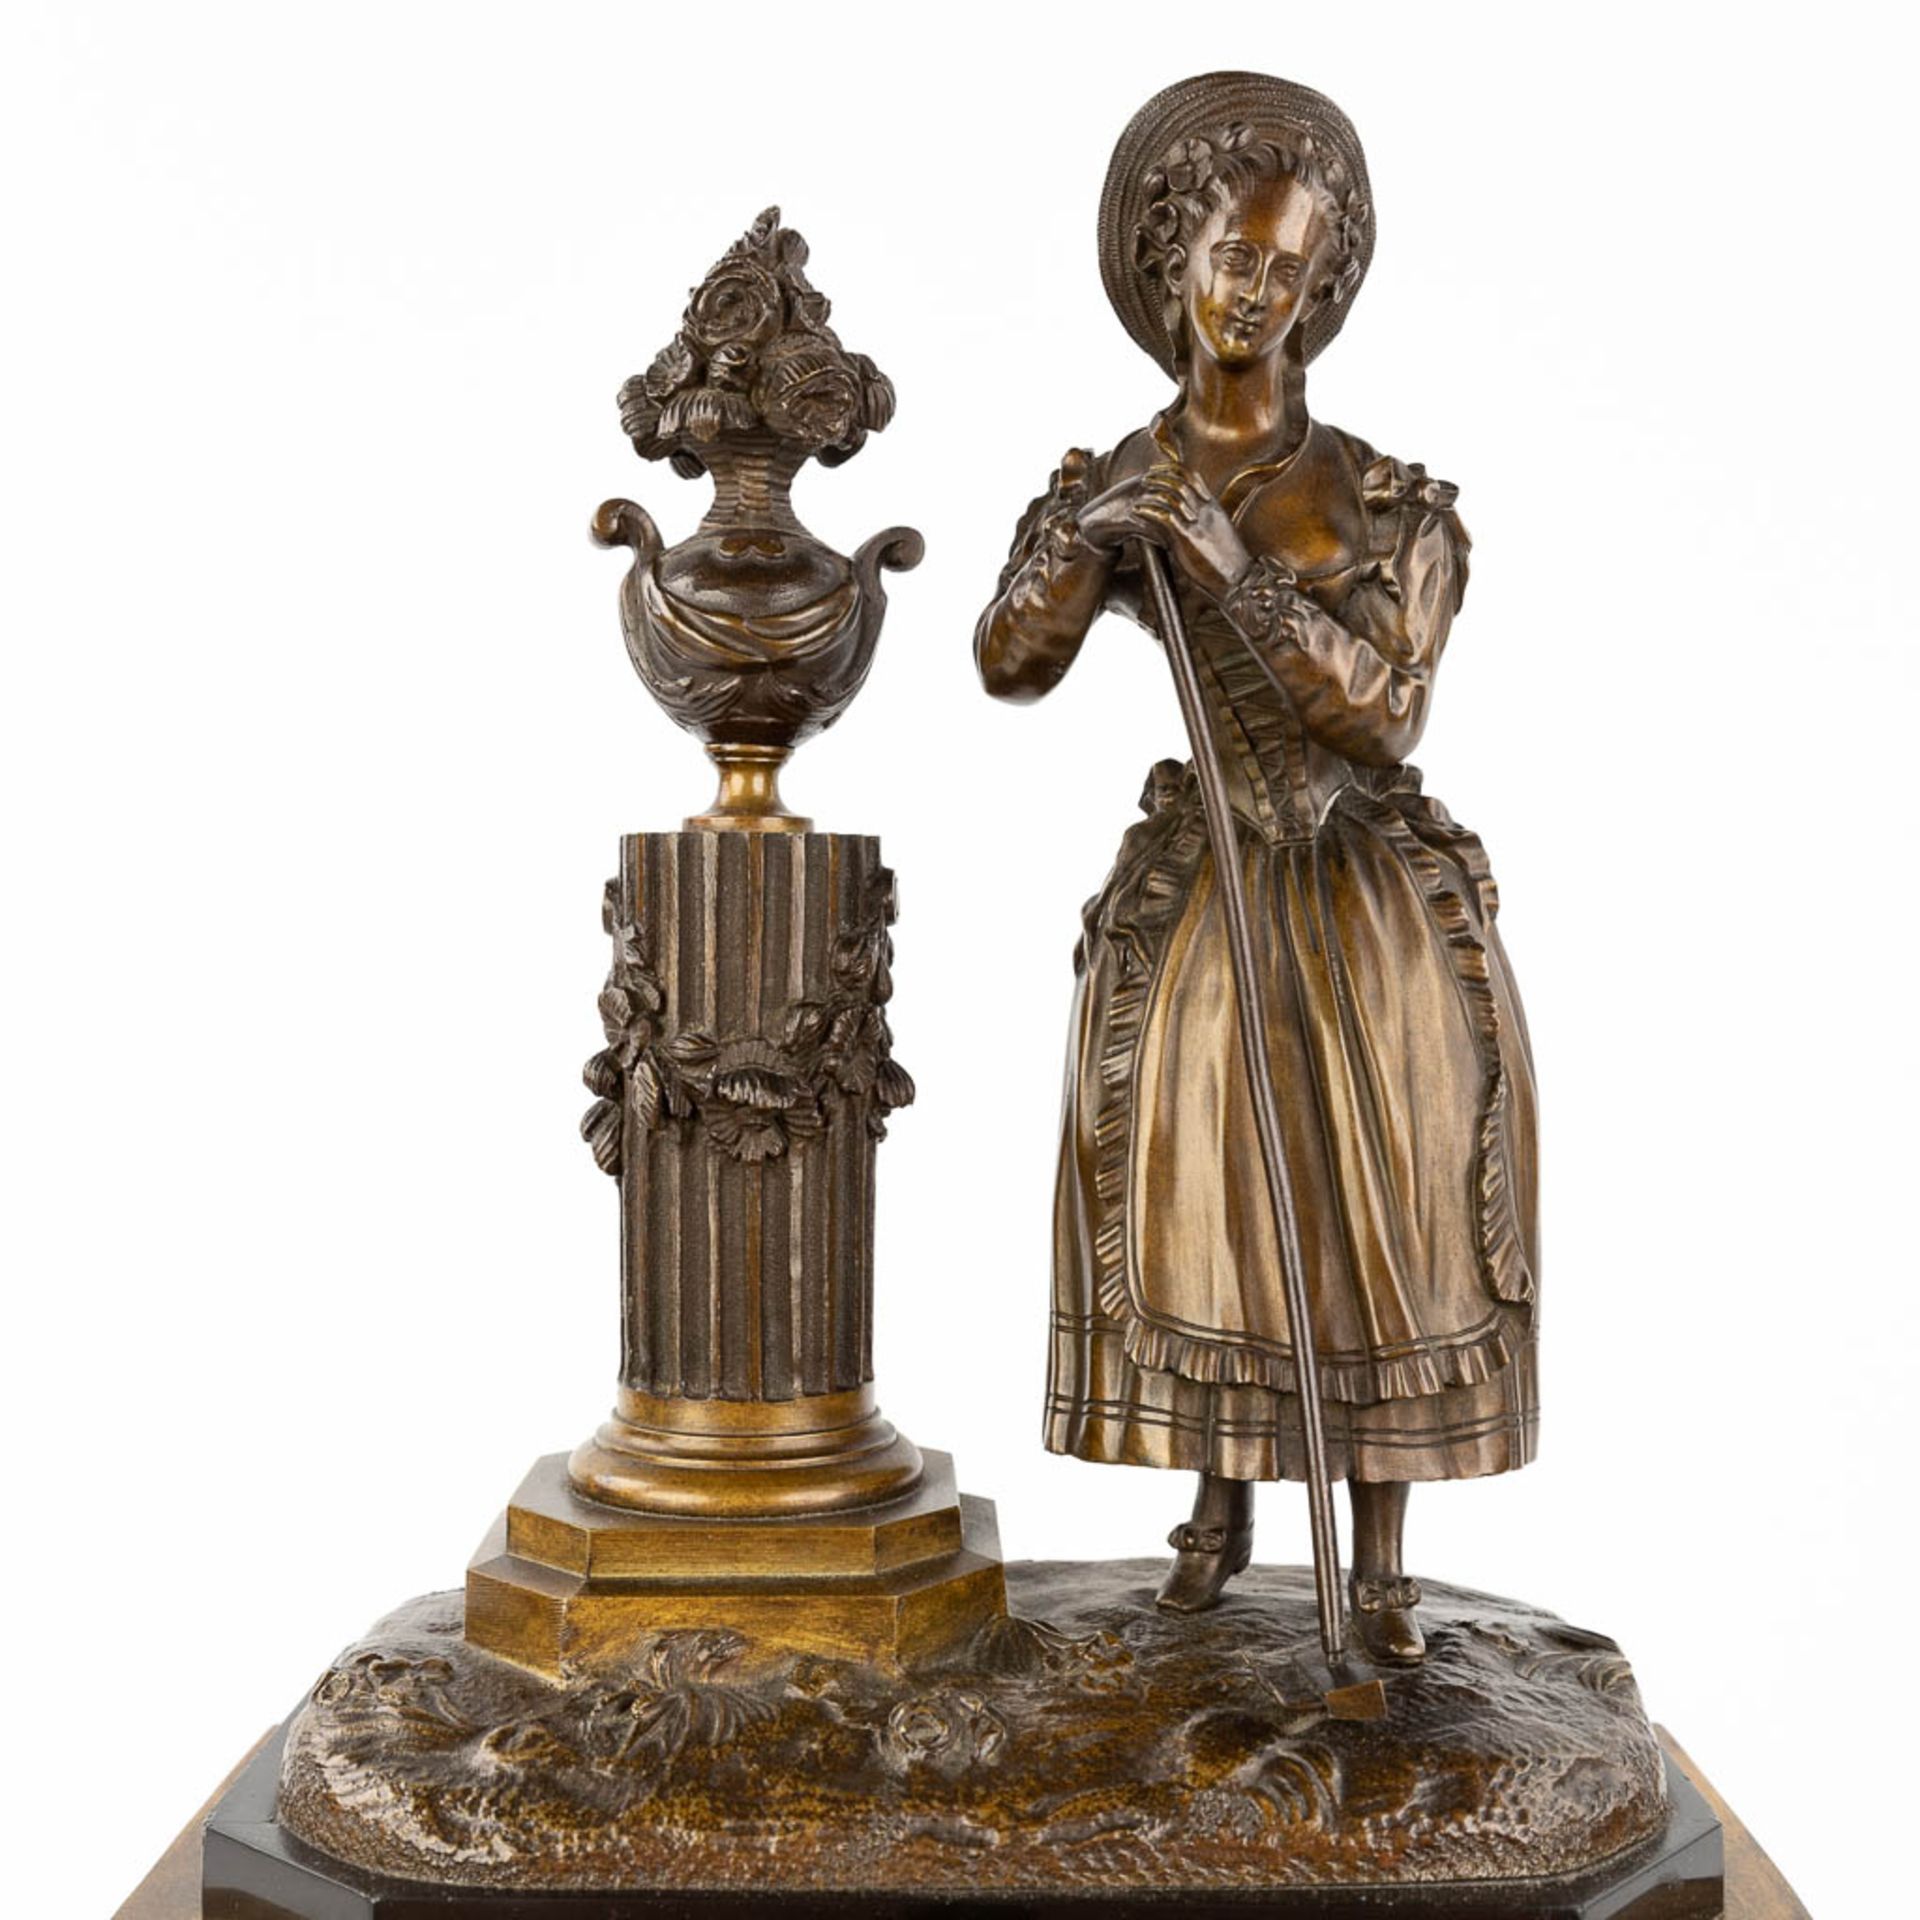 A black marble and bronze mantle clock 'Lady with a rake' 19th C. (L: 12 x W: 22,5 x H: 44 cm) - Image 10 of 12